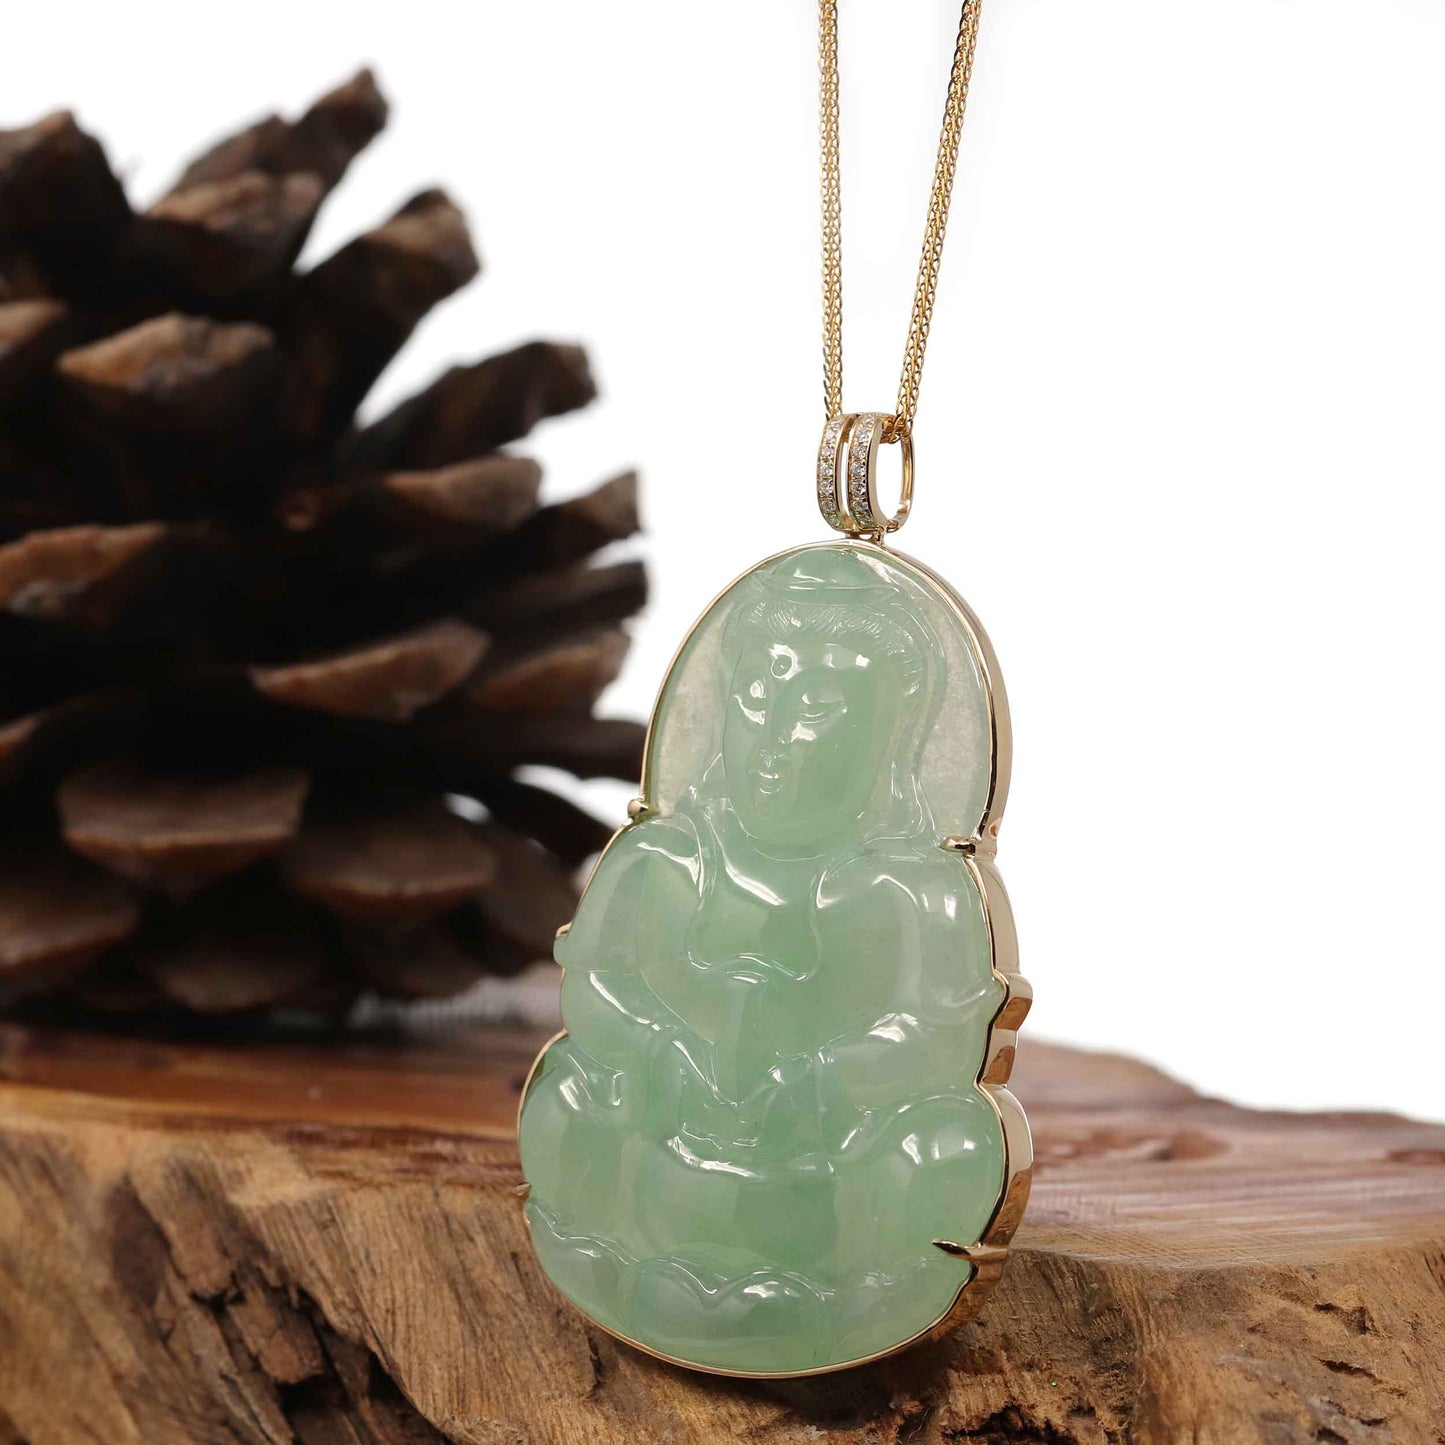 RealJade Co.¨ Jade Guanyin Pendant Necklace  "Goddess of Compassion" 14k Yellow Gold Genuine Burmese Jadeite Jade Guanyin Necklace With Good Luck Design